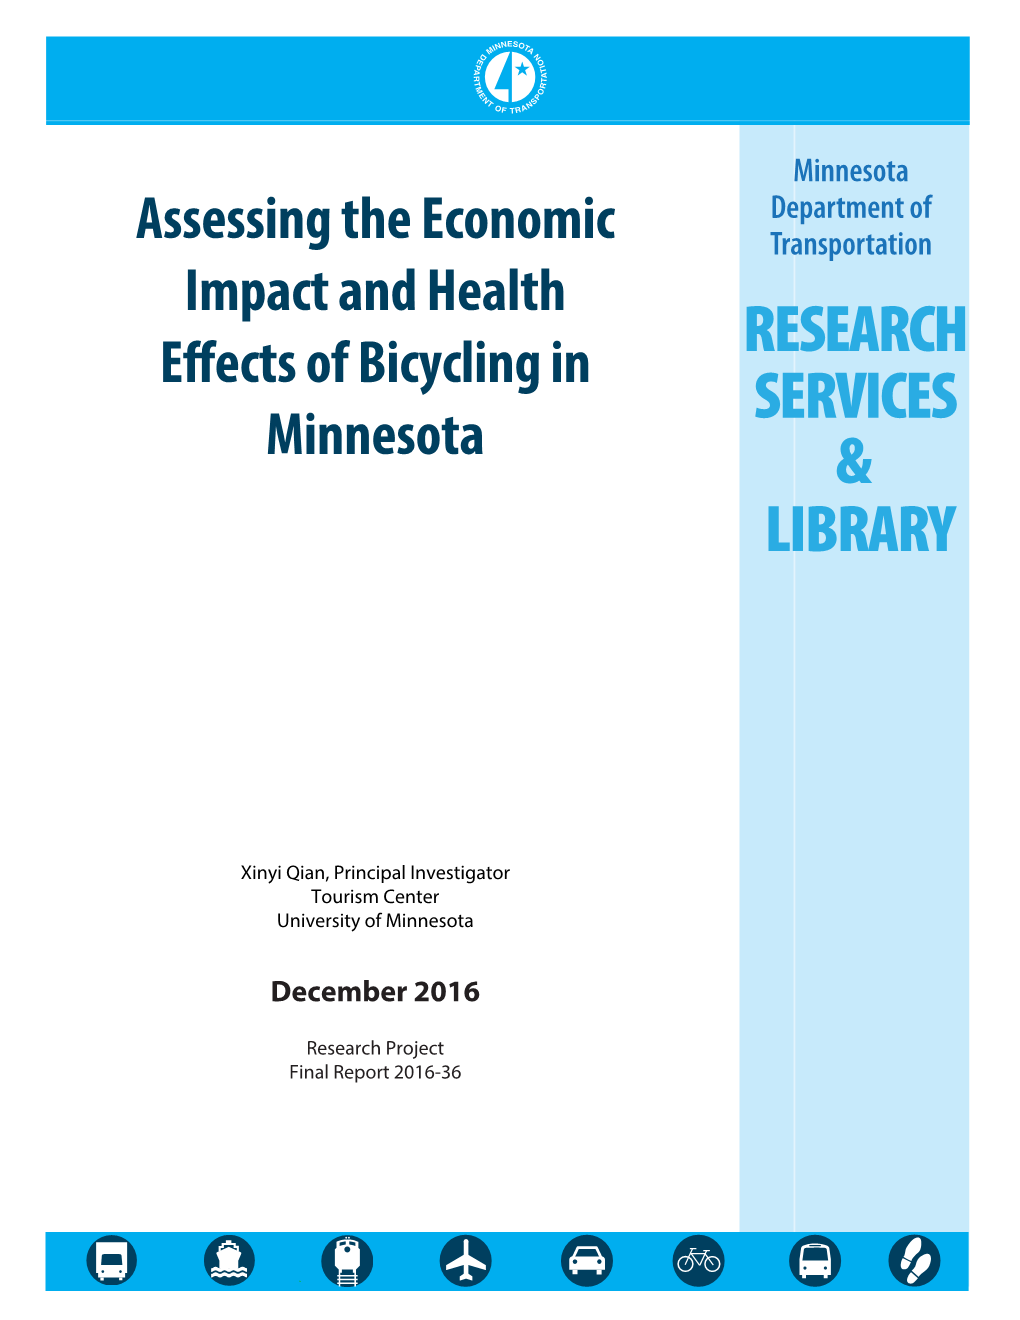 Assessing the Economic Impact and Health Effects of Bicycling in Minnesota